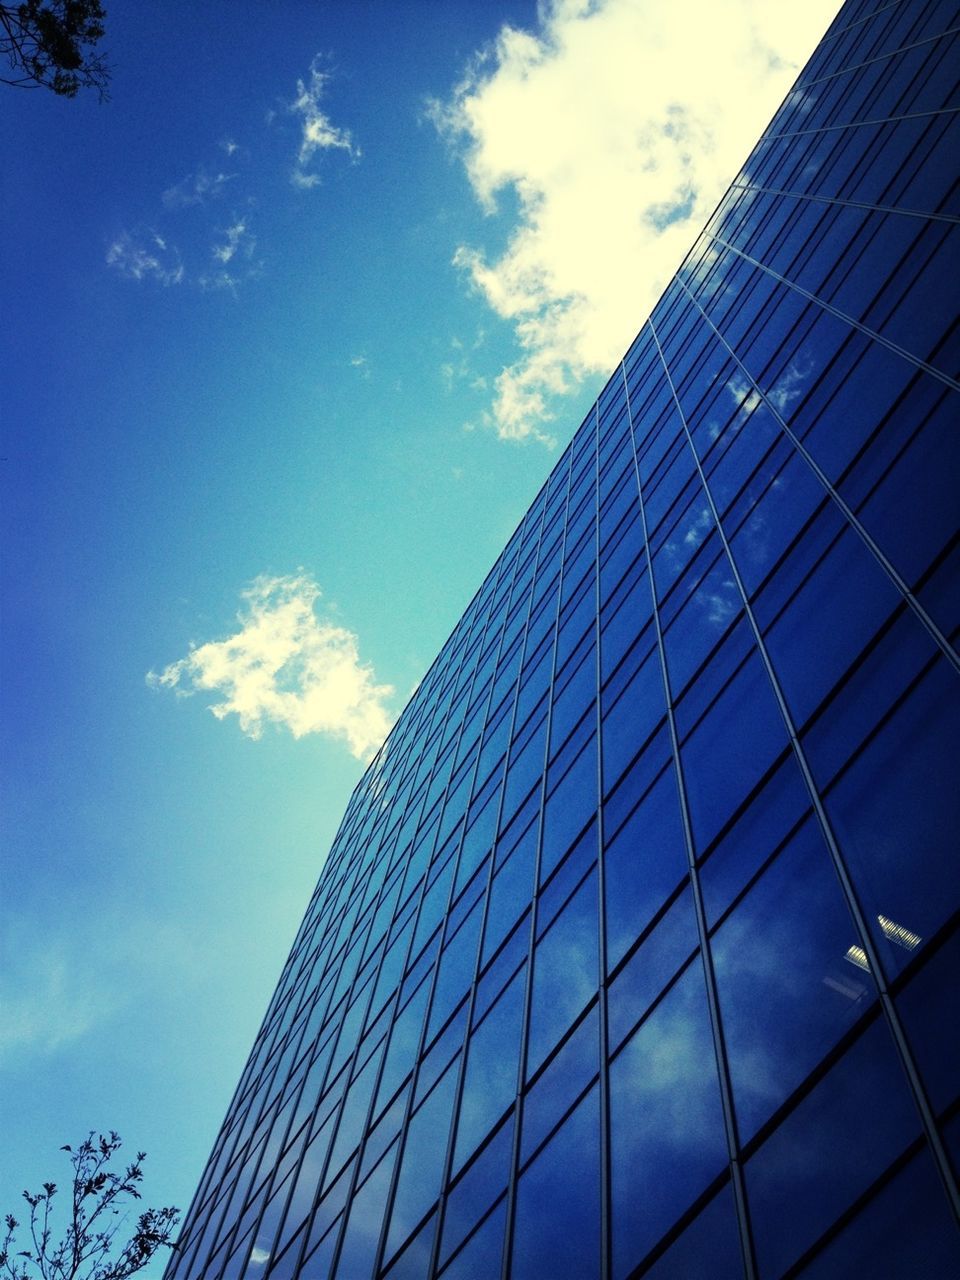 architecture, building exterior, built structure, low angle view, modern, office building, reflection, sky, skyscraper, glass - material, city, tall - high, blue, tower, building, cloud - sky, cloud, day, glass, window